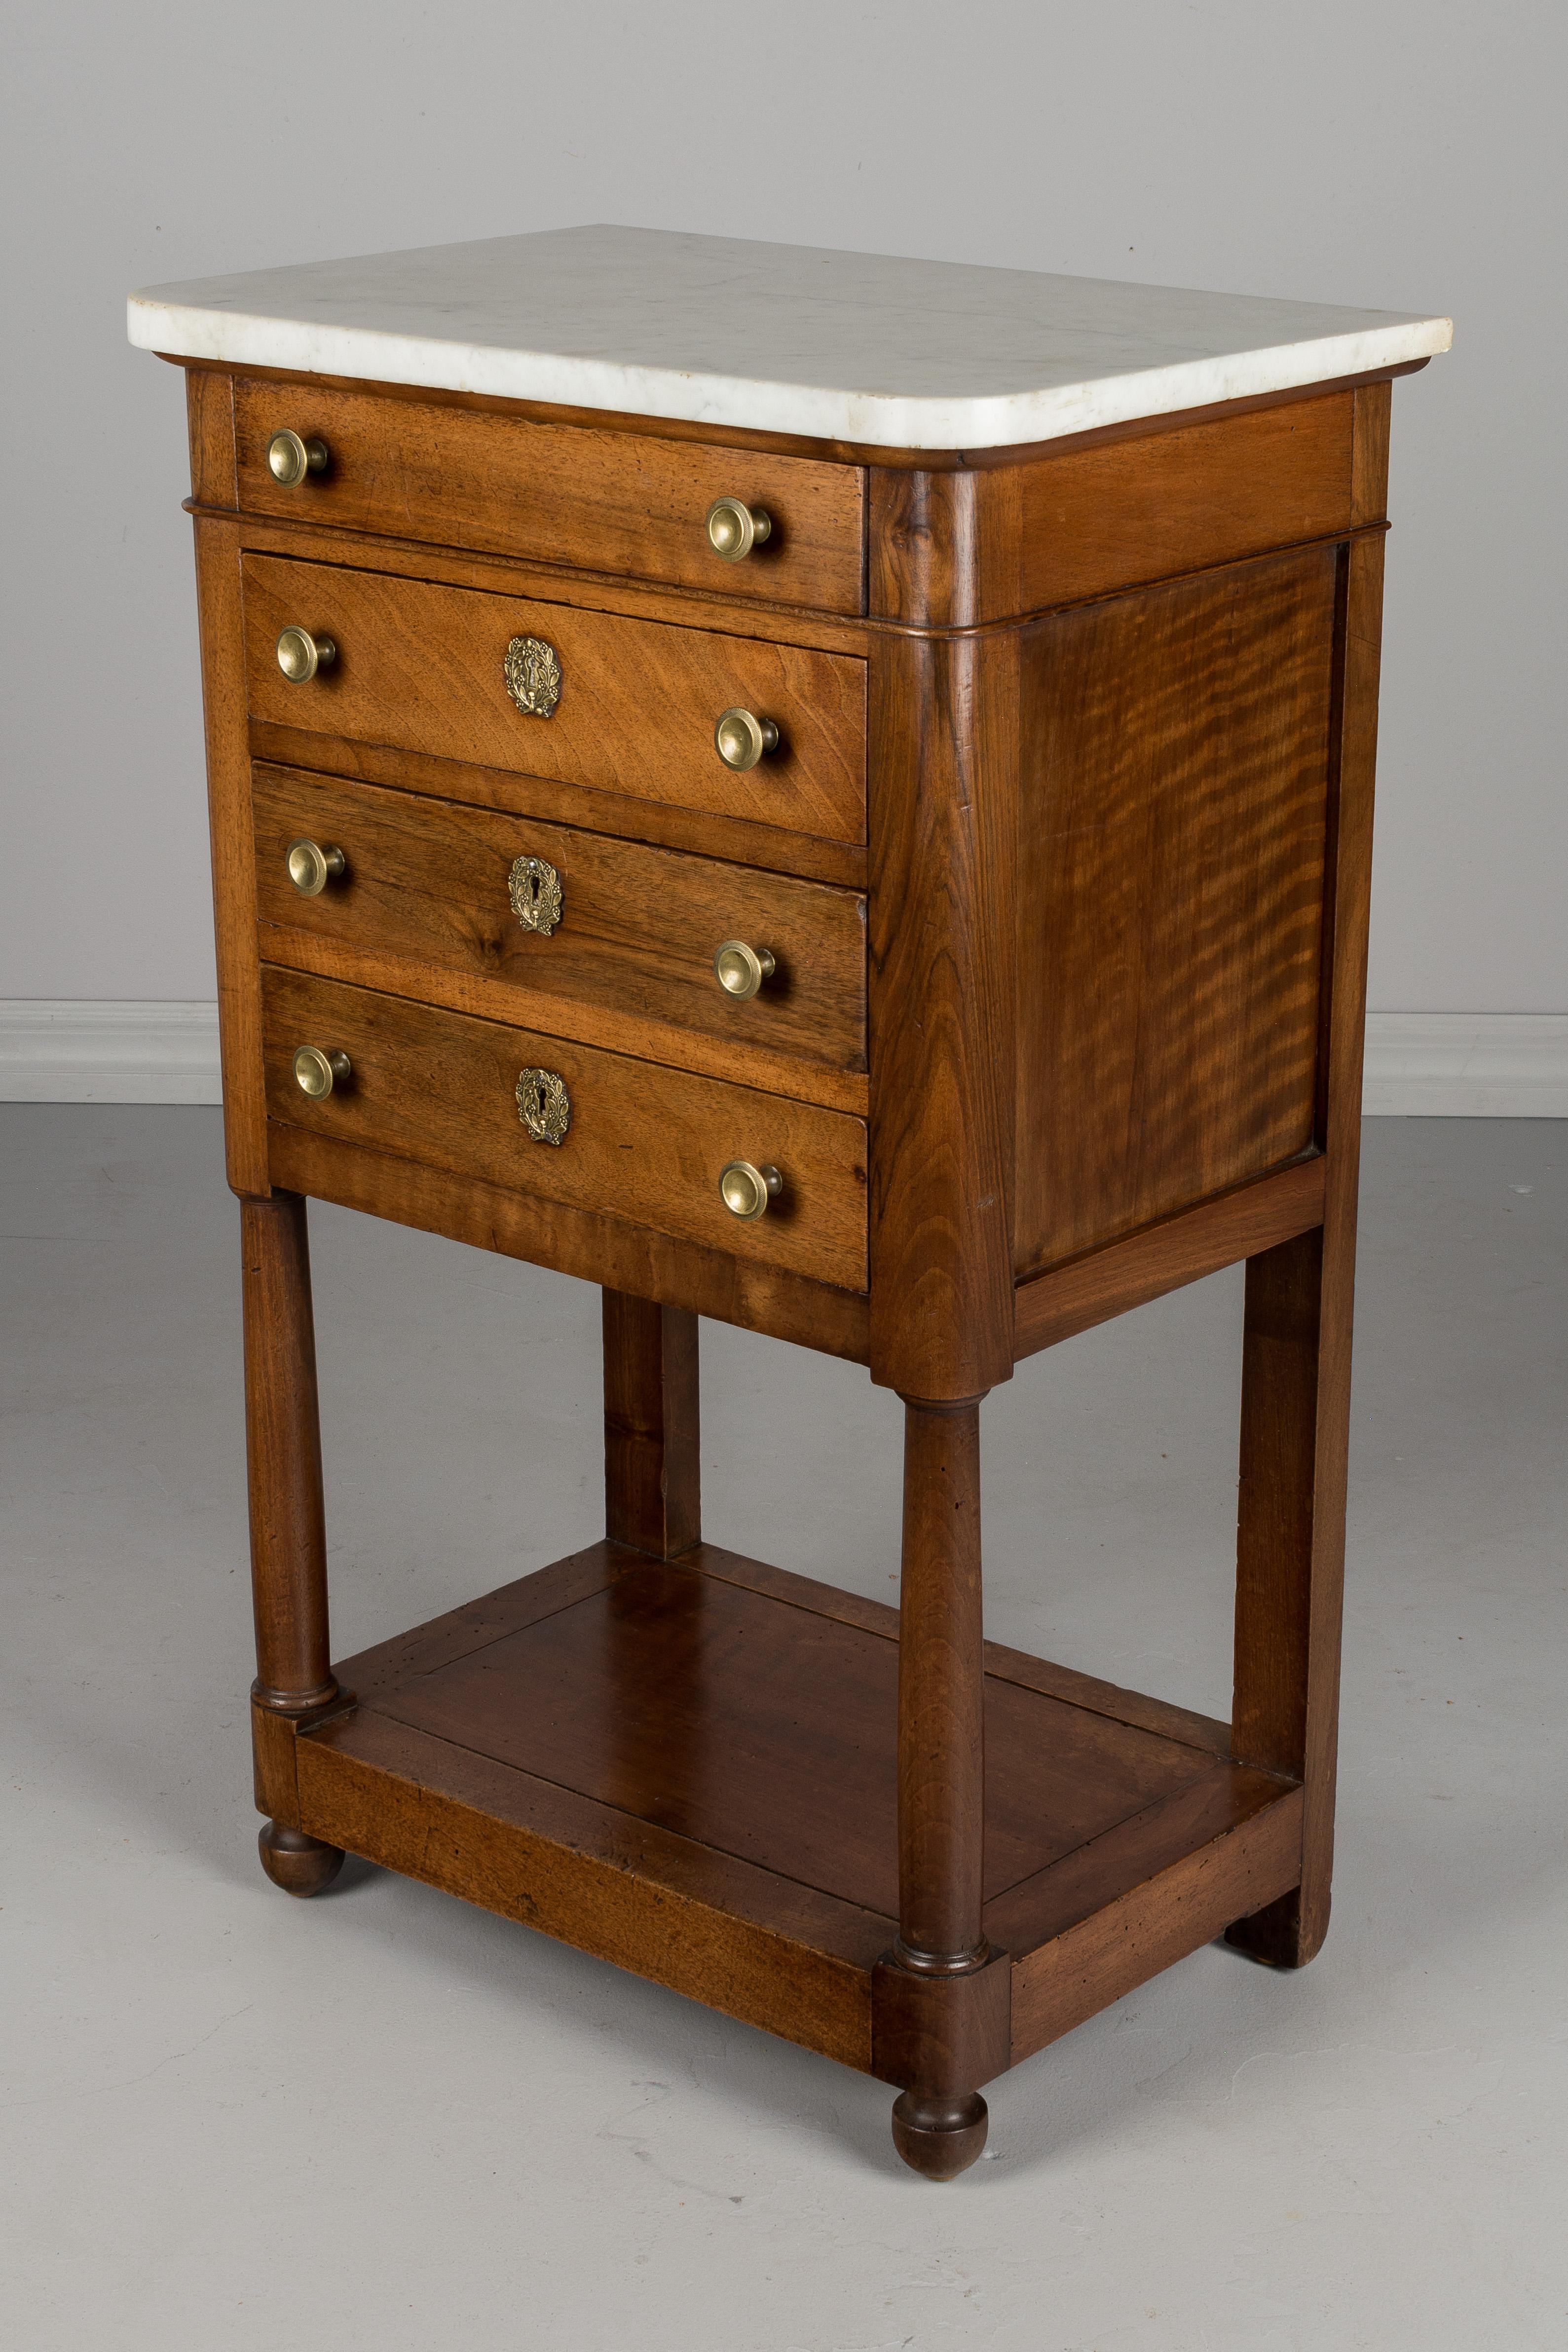 A 19th century French Empire style walnut side table, or nightstand. Four dovetailed drawers with original brass hardware. Two bottom drawers with locks, but no keys. Turned wood columns in the front. White marble top is original and is not